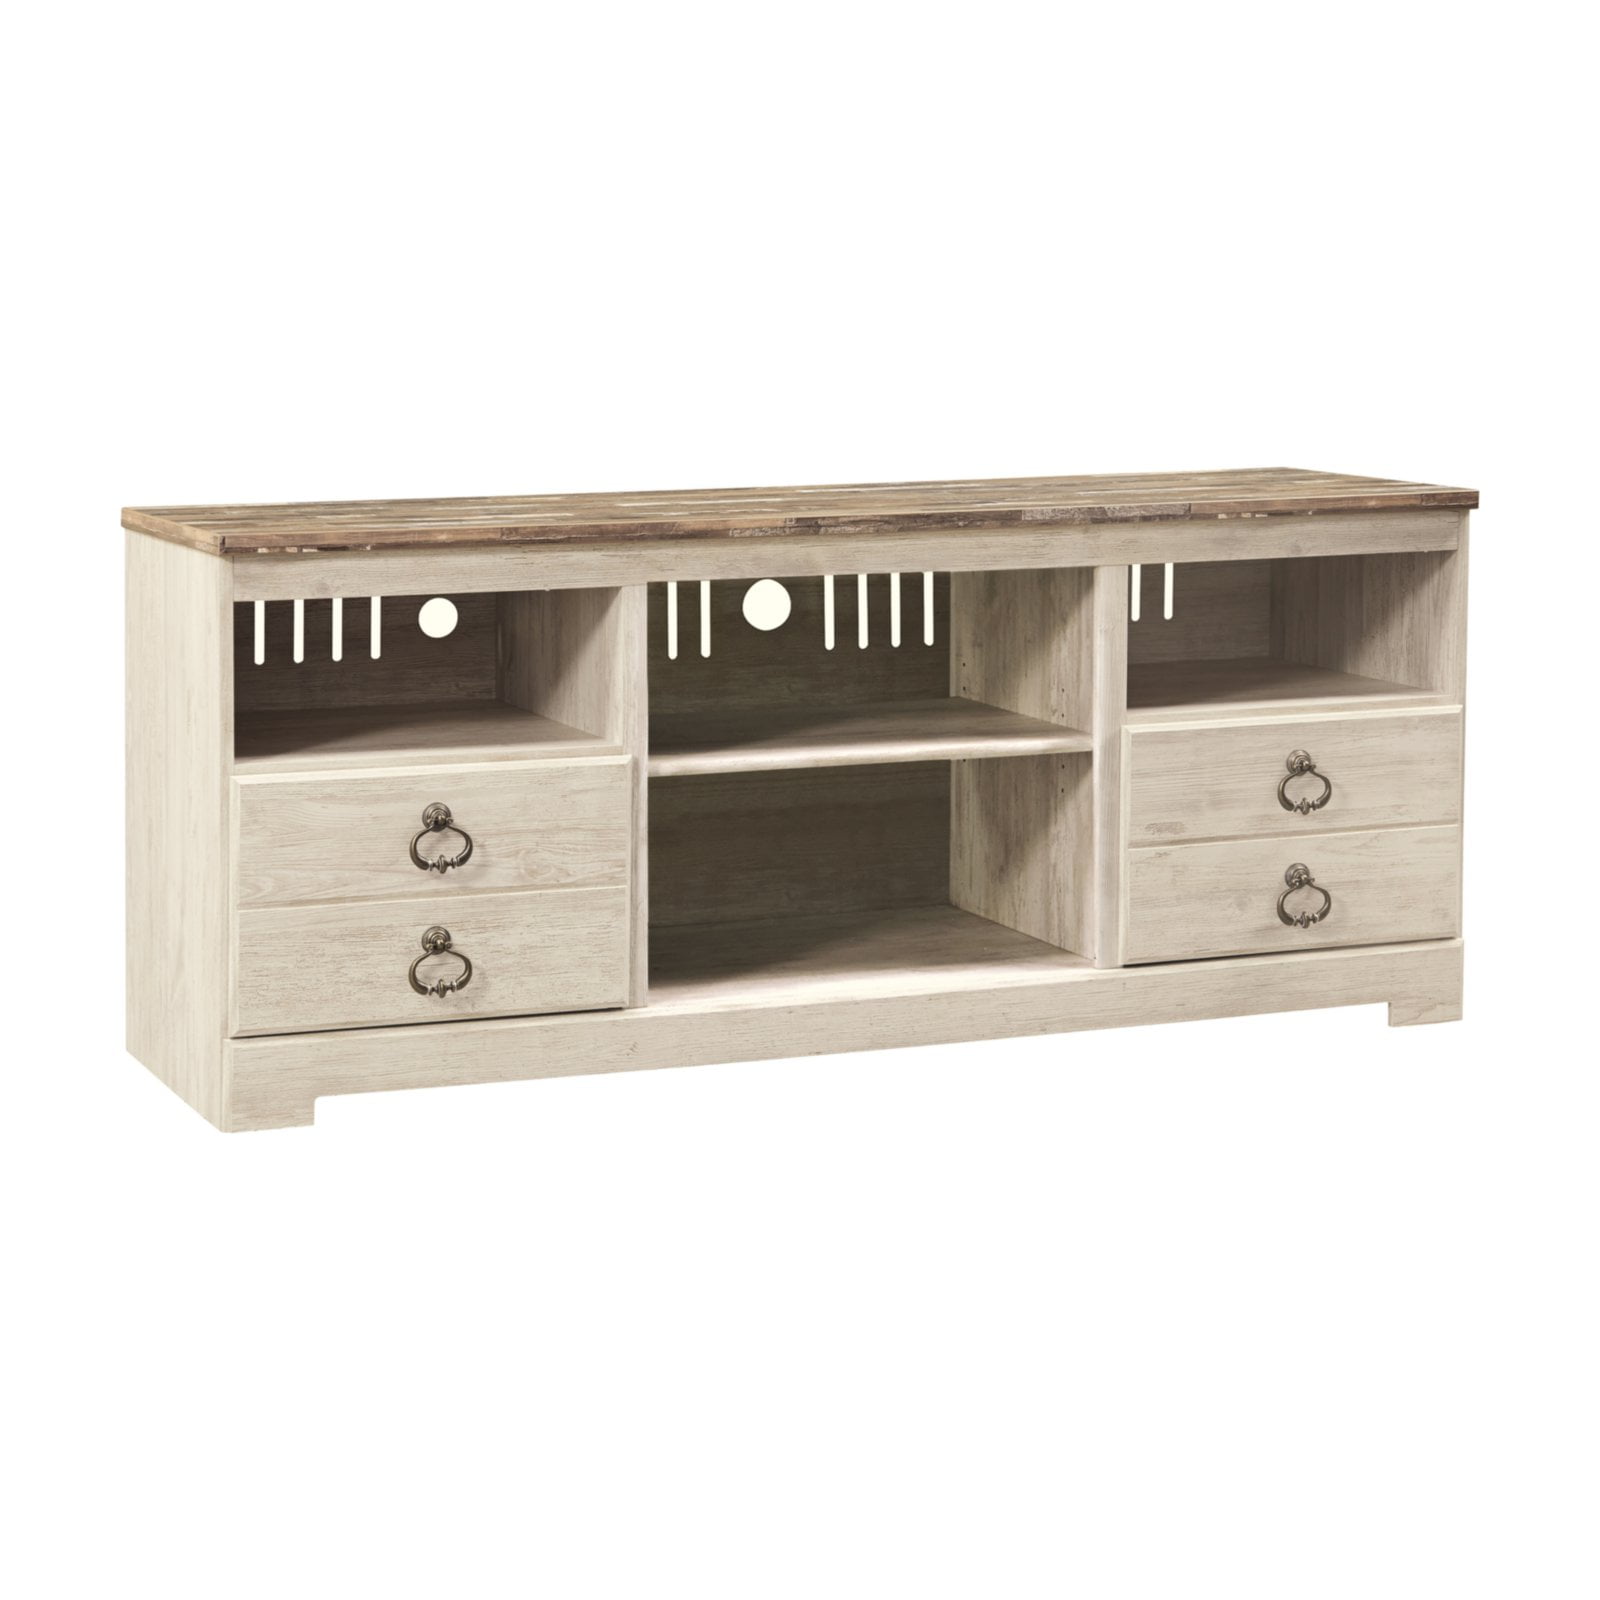 Signature Design By Ashley Willowton Tv, Willowton Whitewash Large Tv Stand W Fireplace Insert